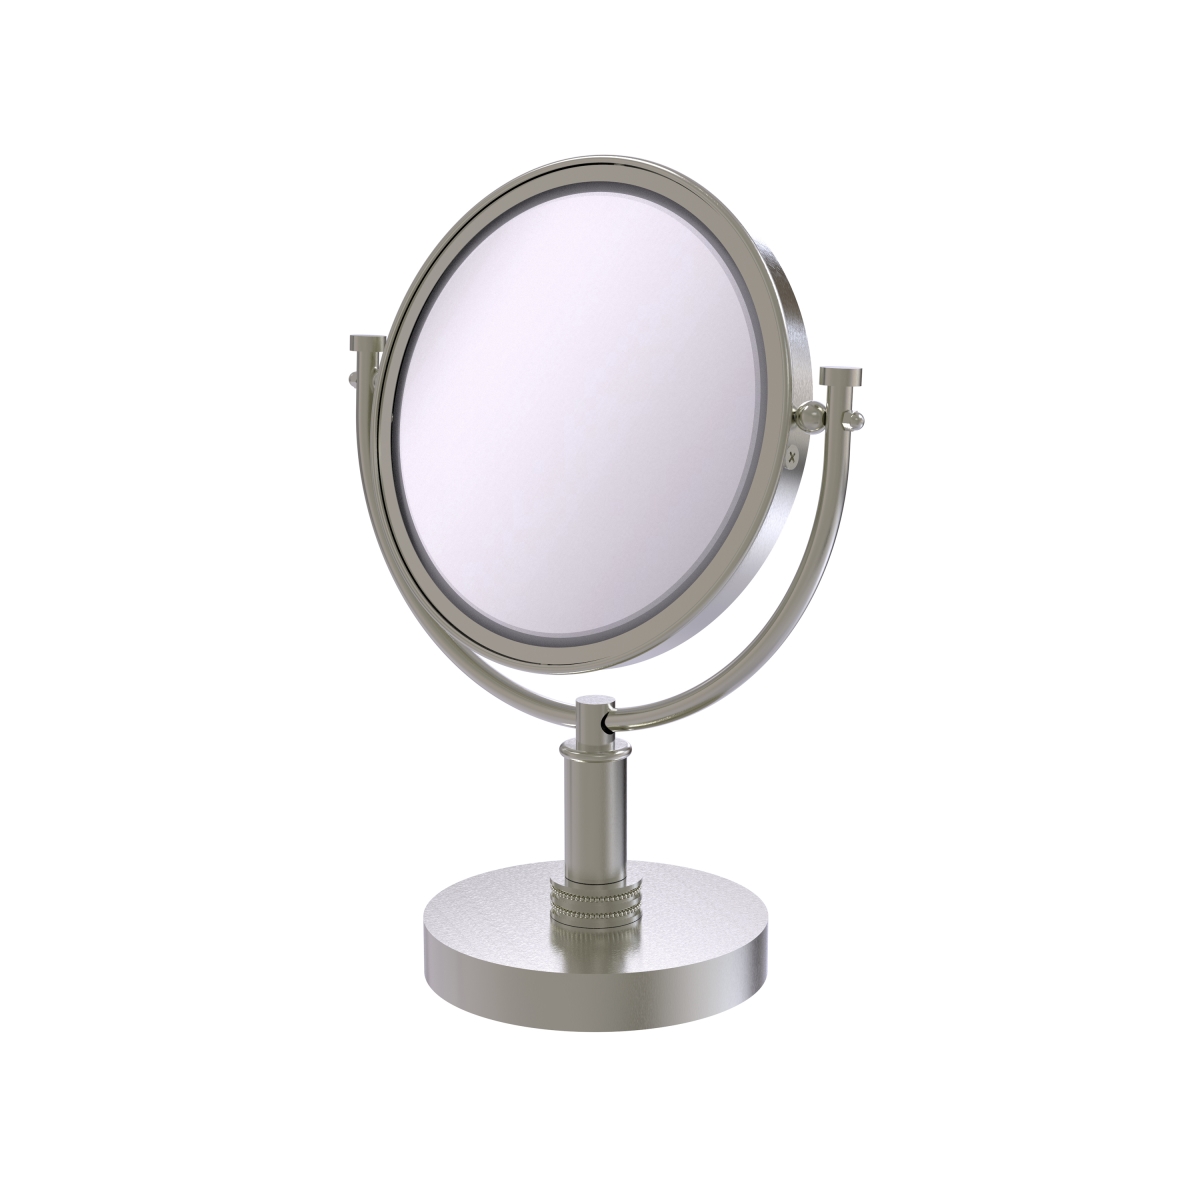 Picture of Allied Brass DM-4D-5X-SN 8 in. Vanity Top Make-Up Mirror 5X Magnification, Satin Nickel - 15 x 8 x 8 in.